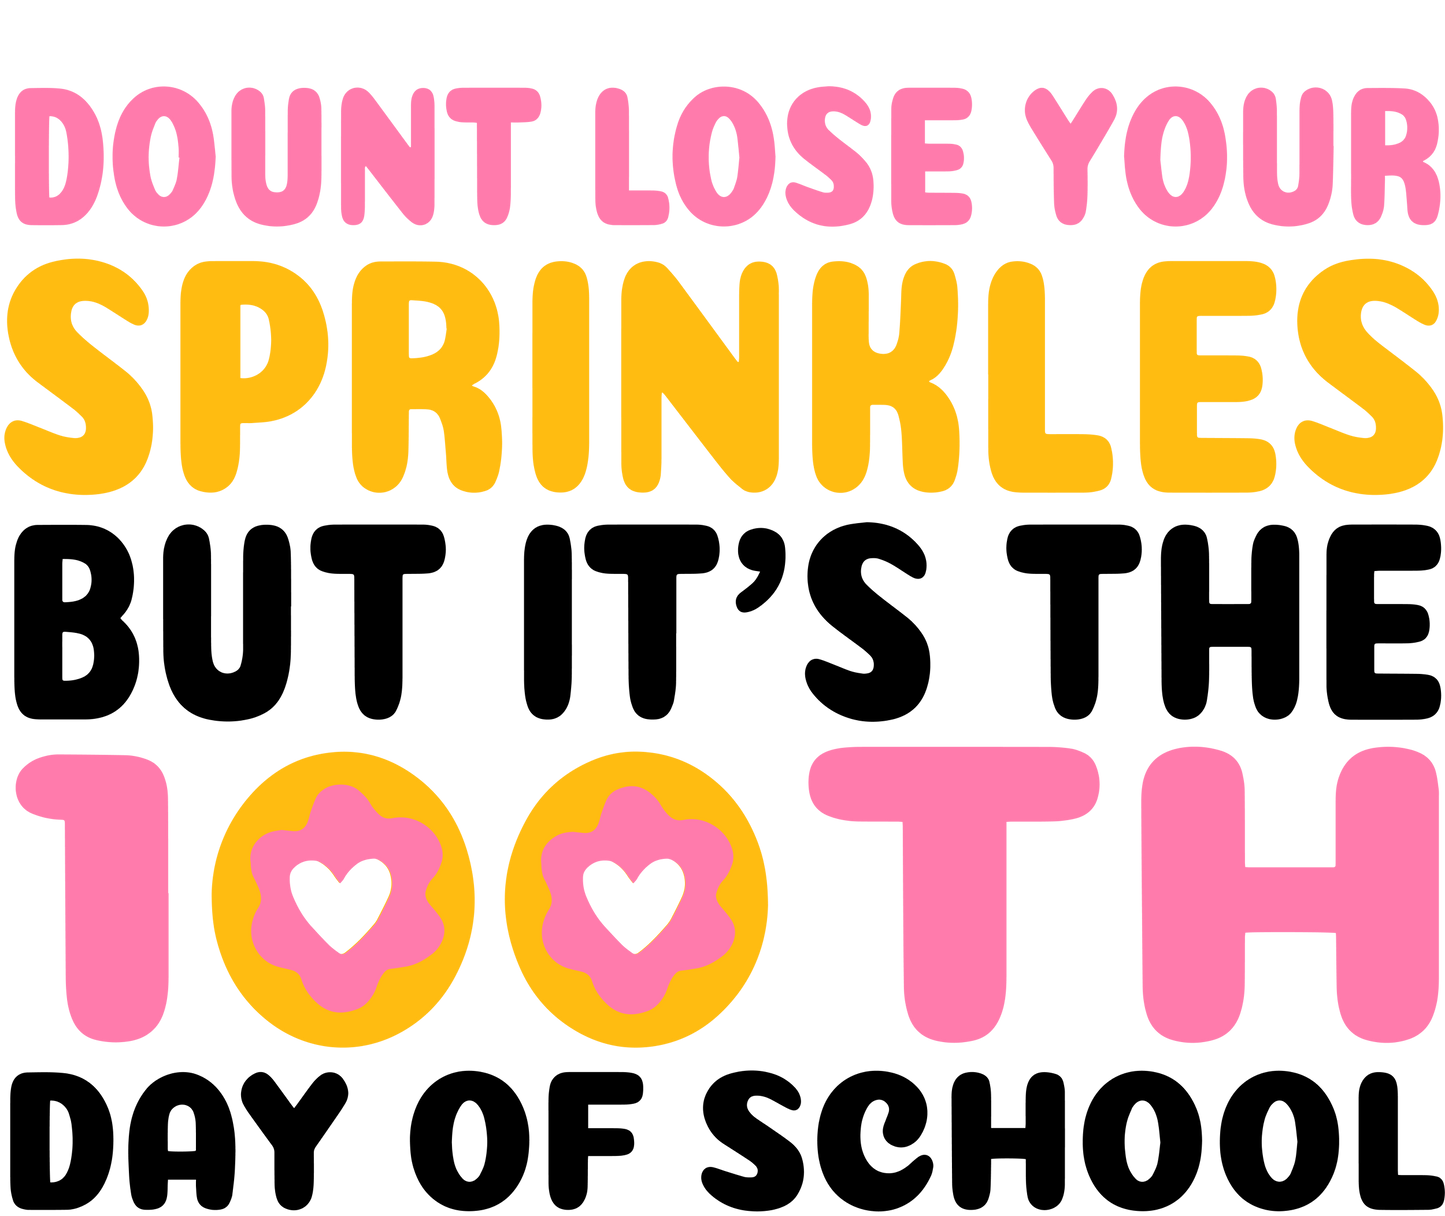 DONT LOSE YOUR SPRINKLES BUT IT'S THE 100TH DAY OF SCHOOL